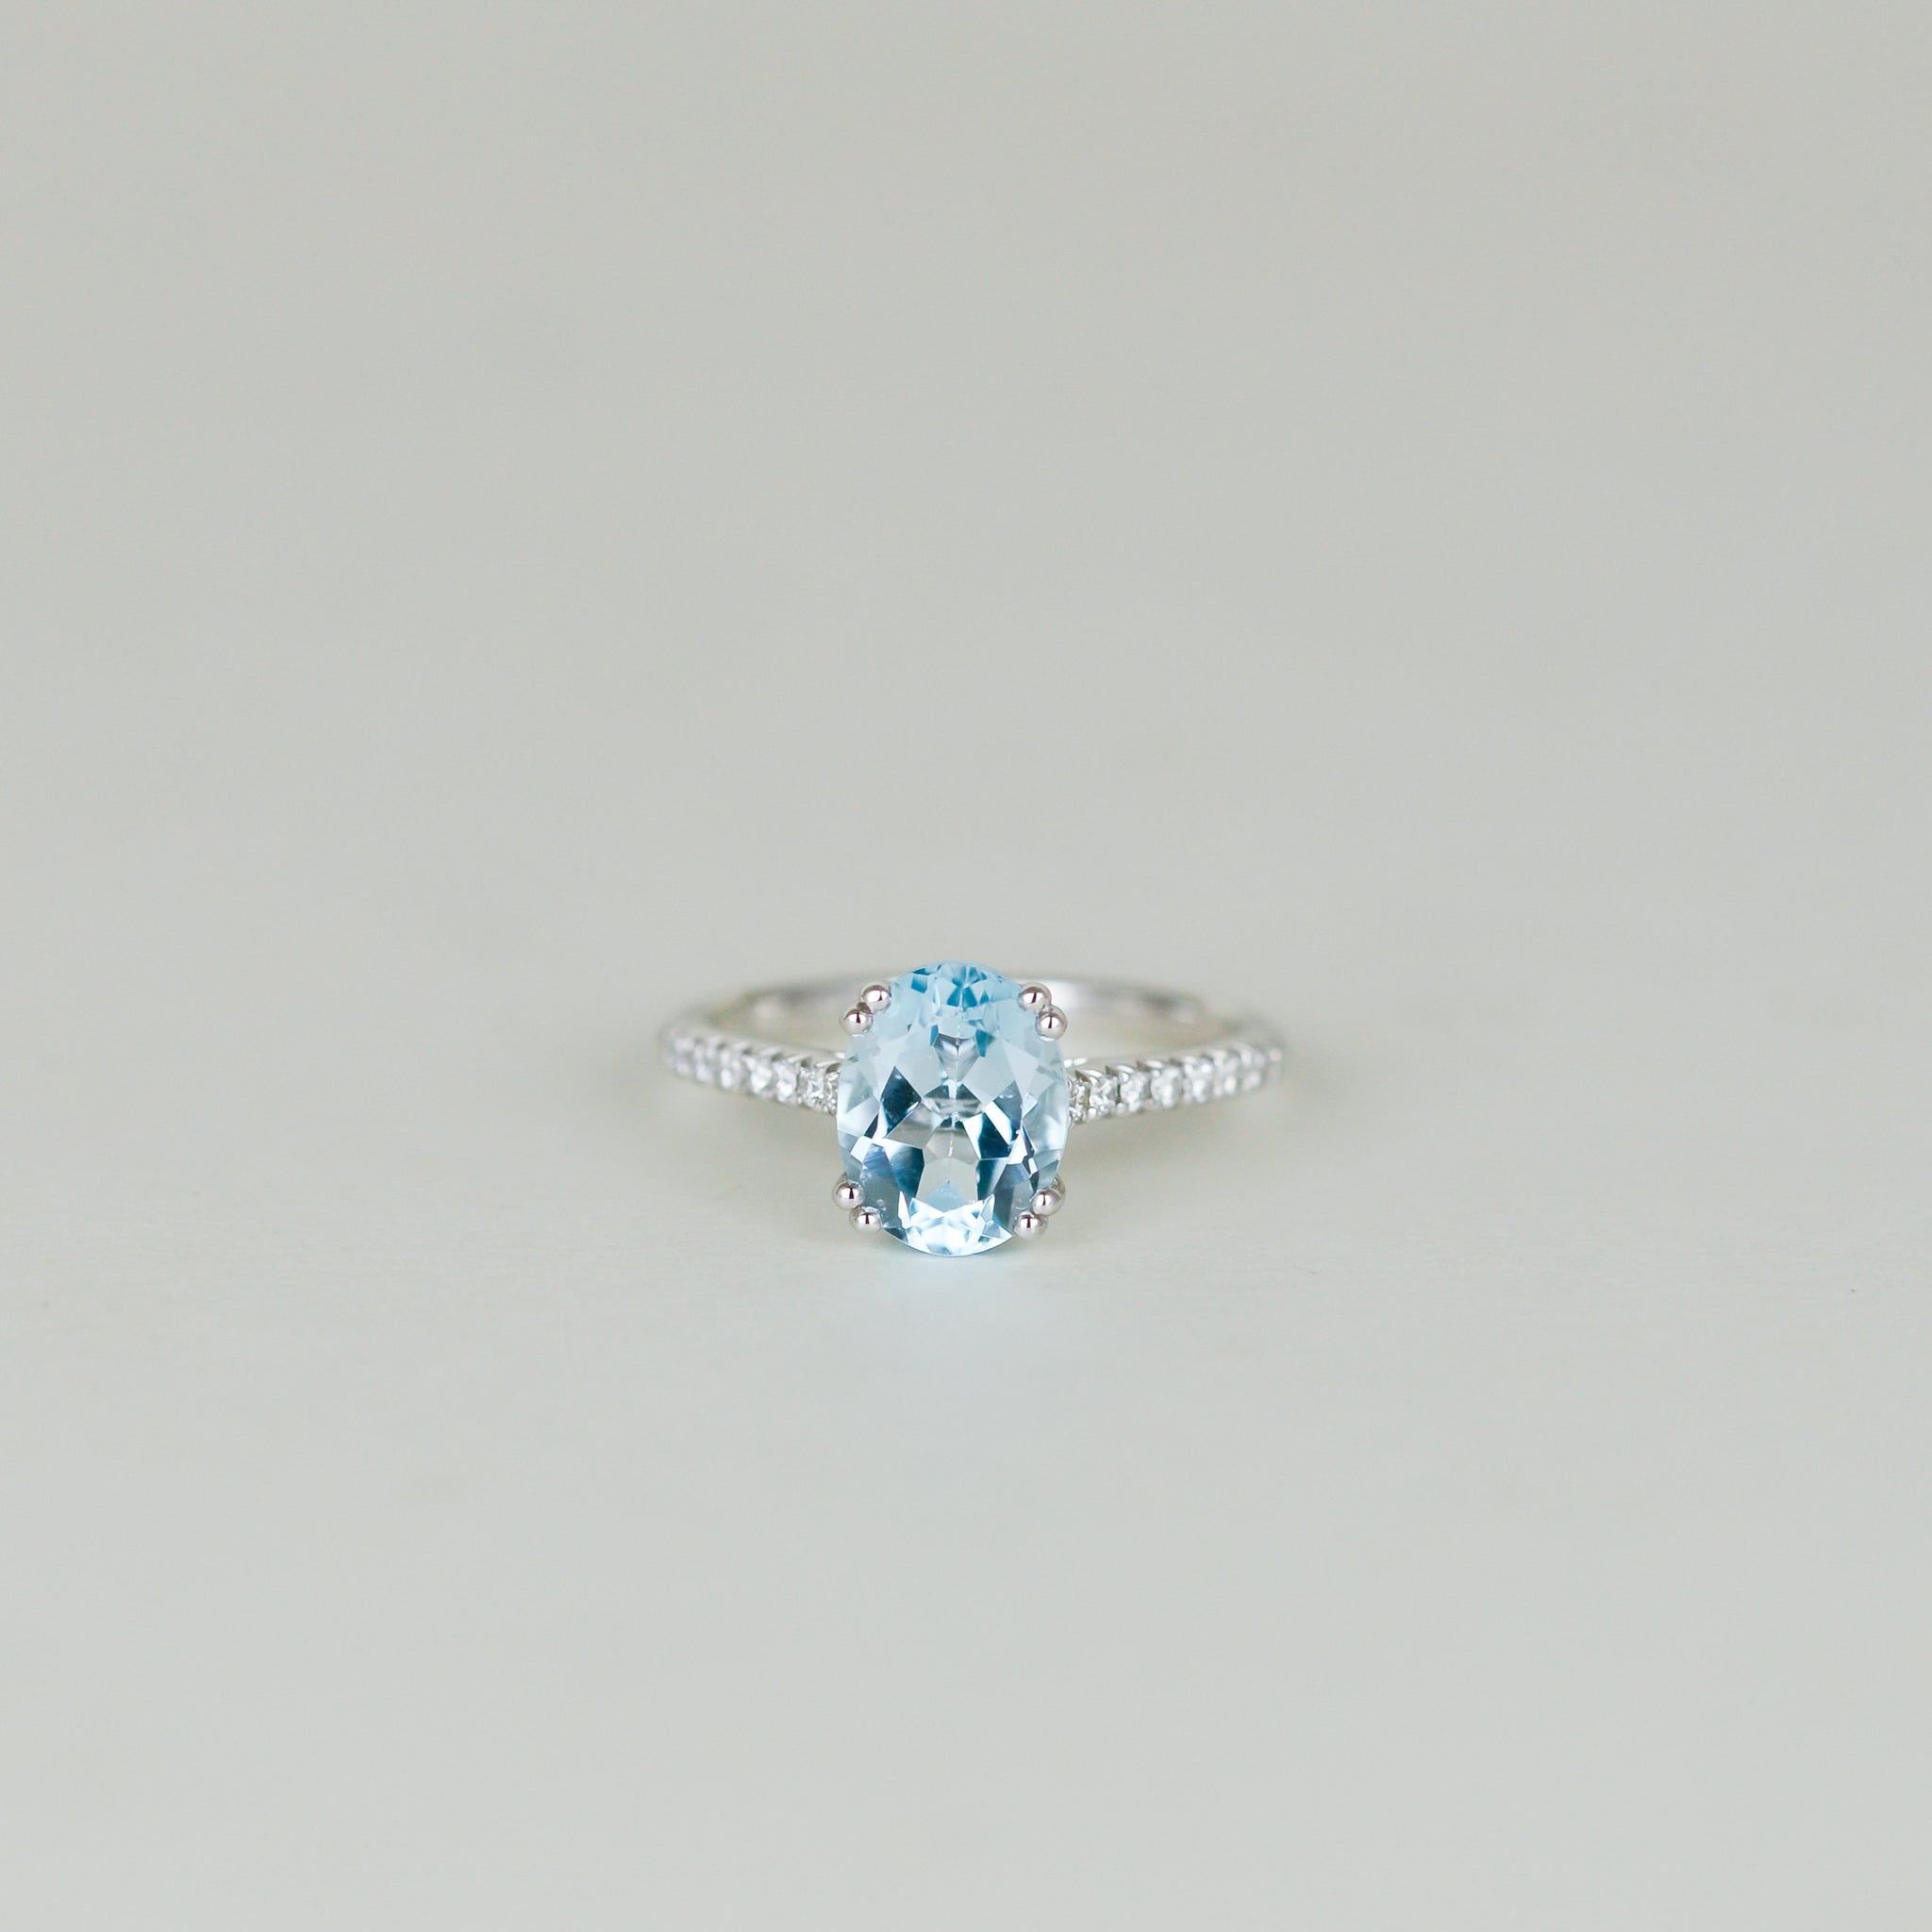 9ct White Gold 2.28ct Oval Blue Topaz and Diamond Dress Ring